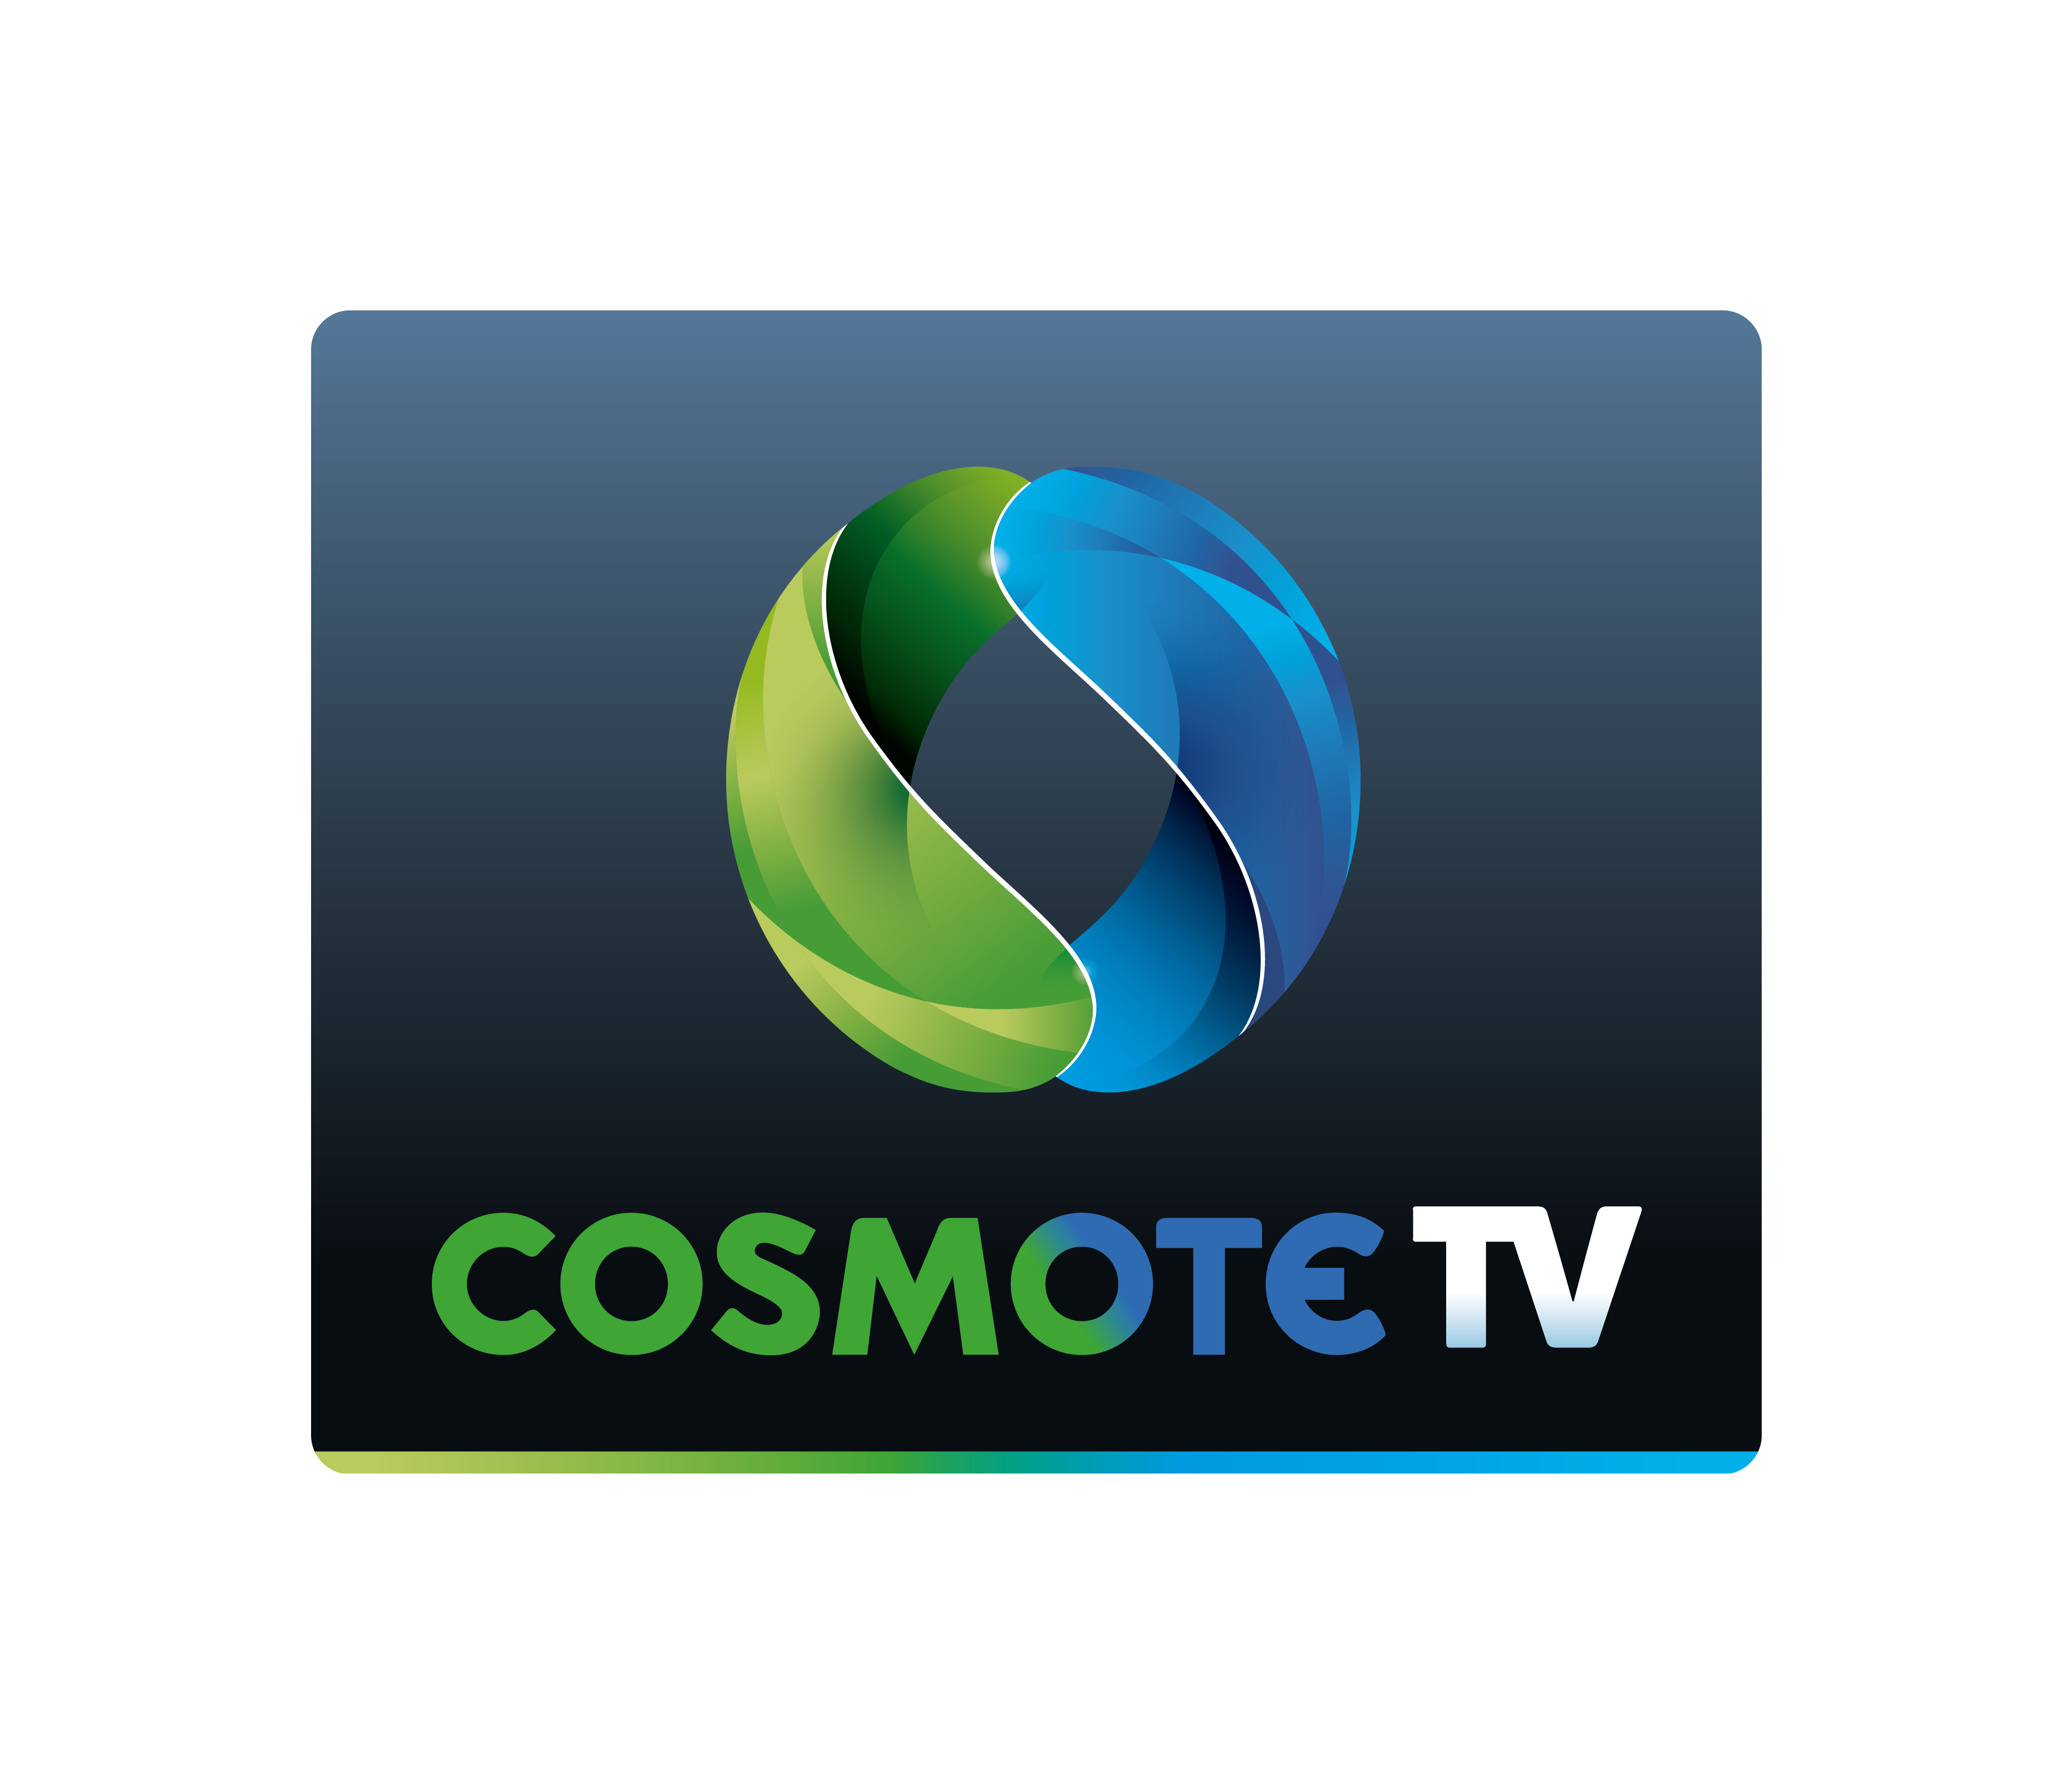 cOSMOTE